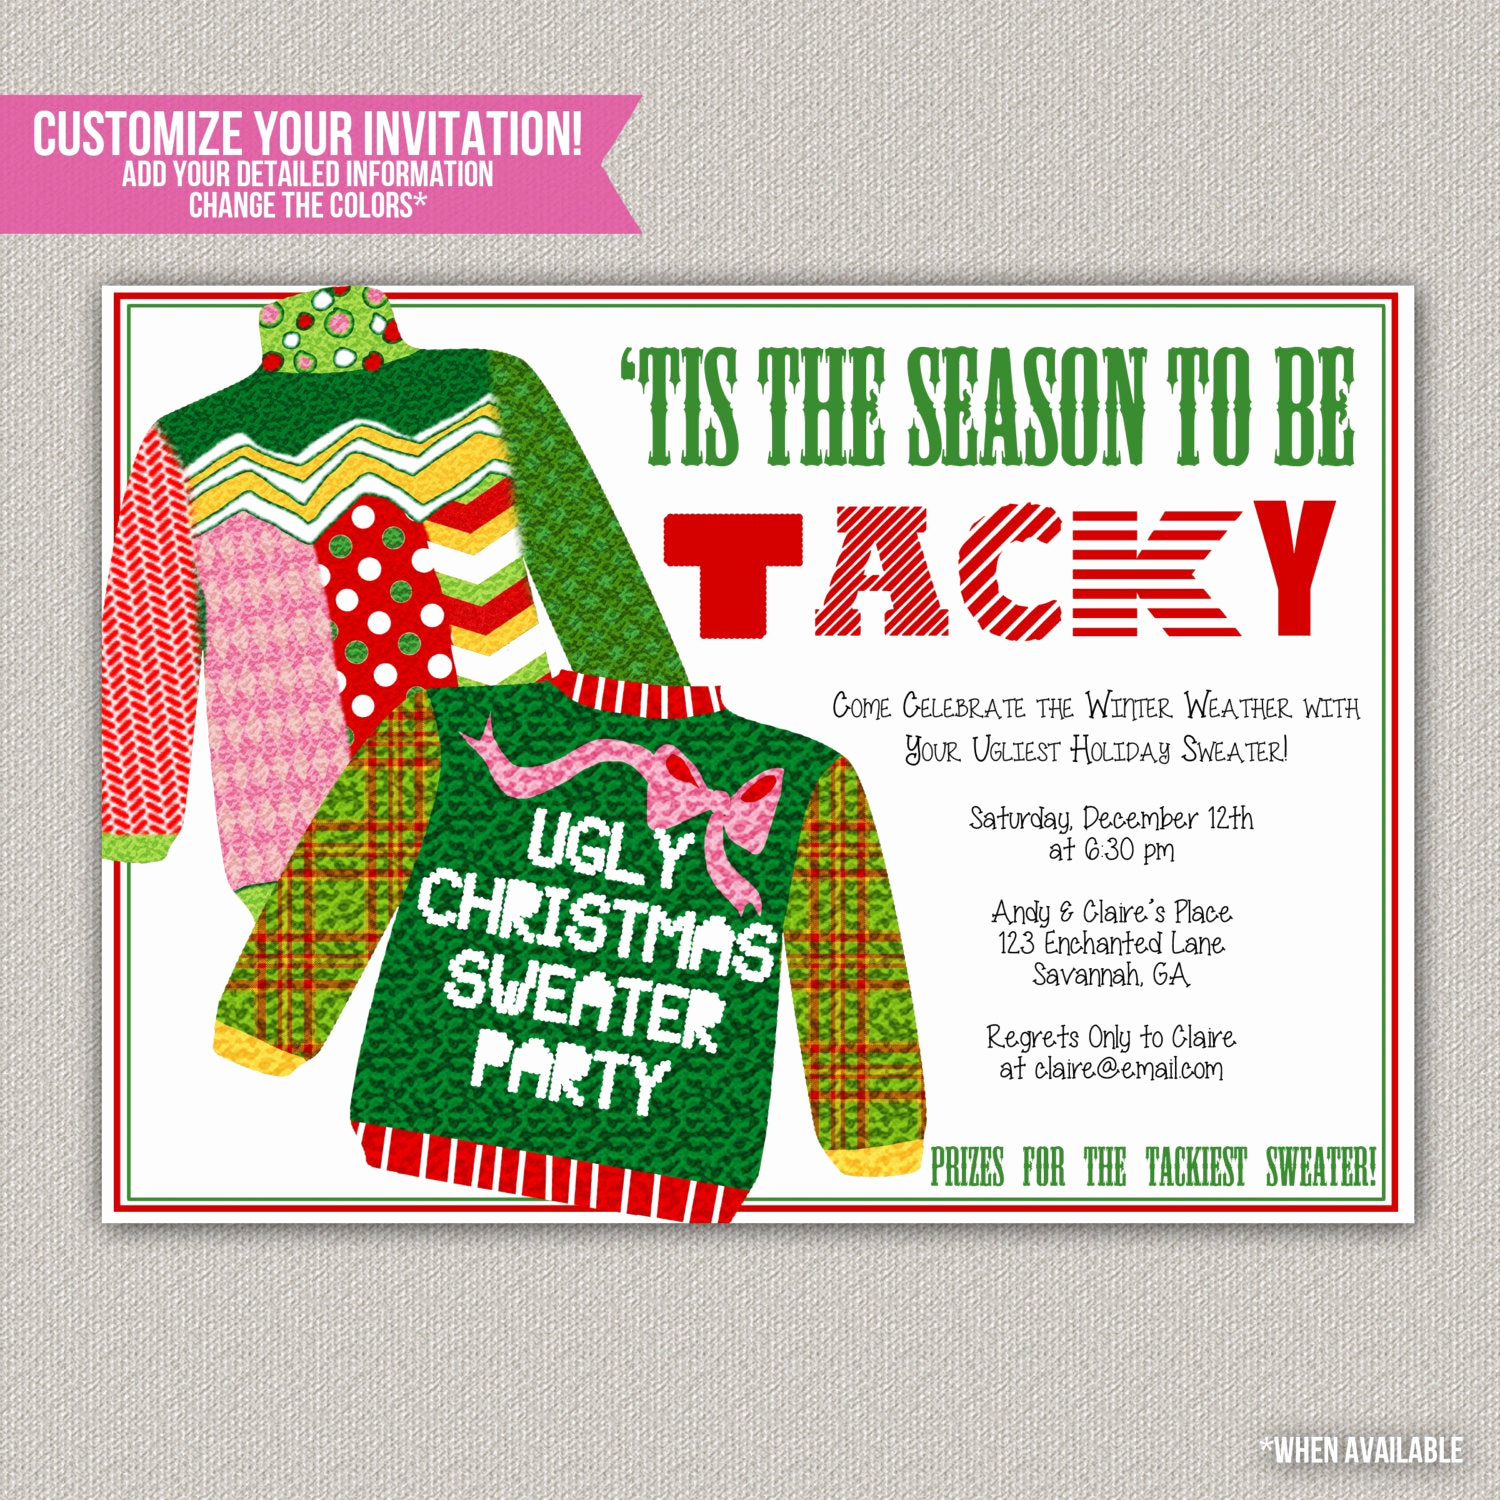 Ugly Sweater Party Invitation Free Beautiful Tis the Season to Be Tacky Tacky Sweater by Enchanteddesigns4u